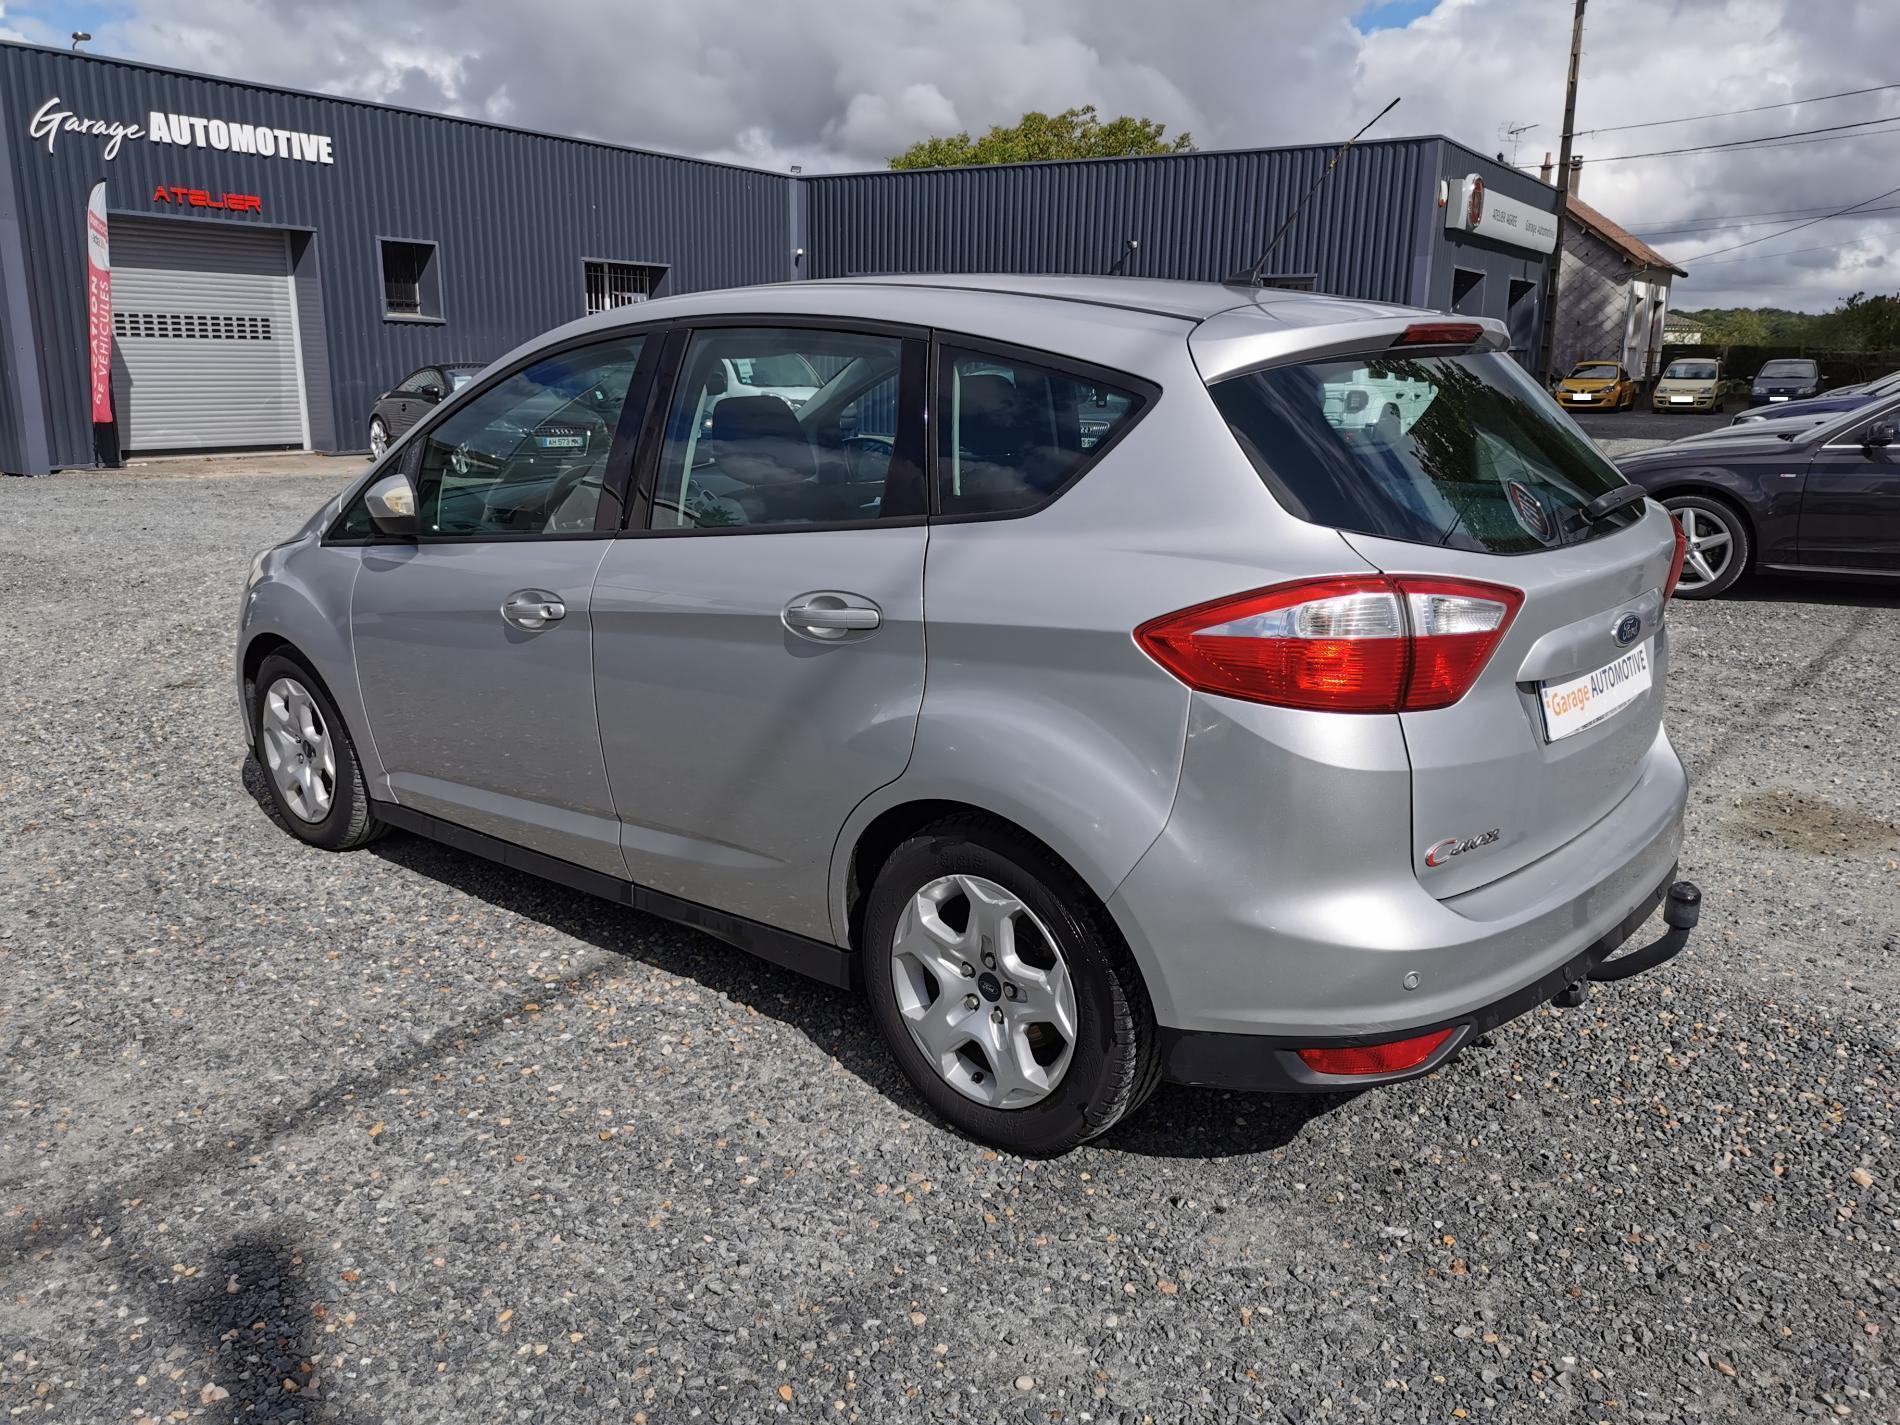 Ford cmax ii 1.6 tdci 95ch bvm6 finition trend et